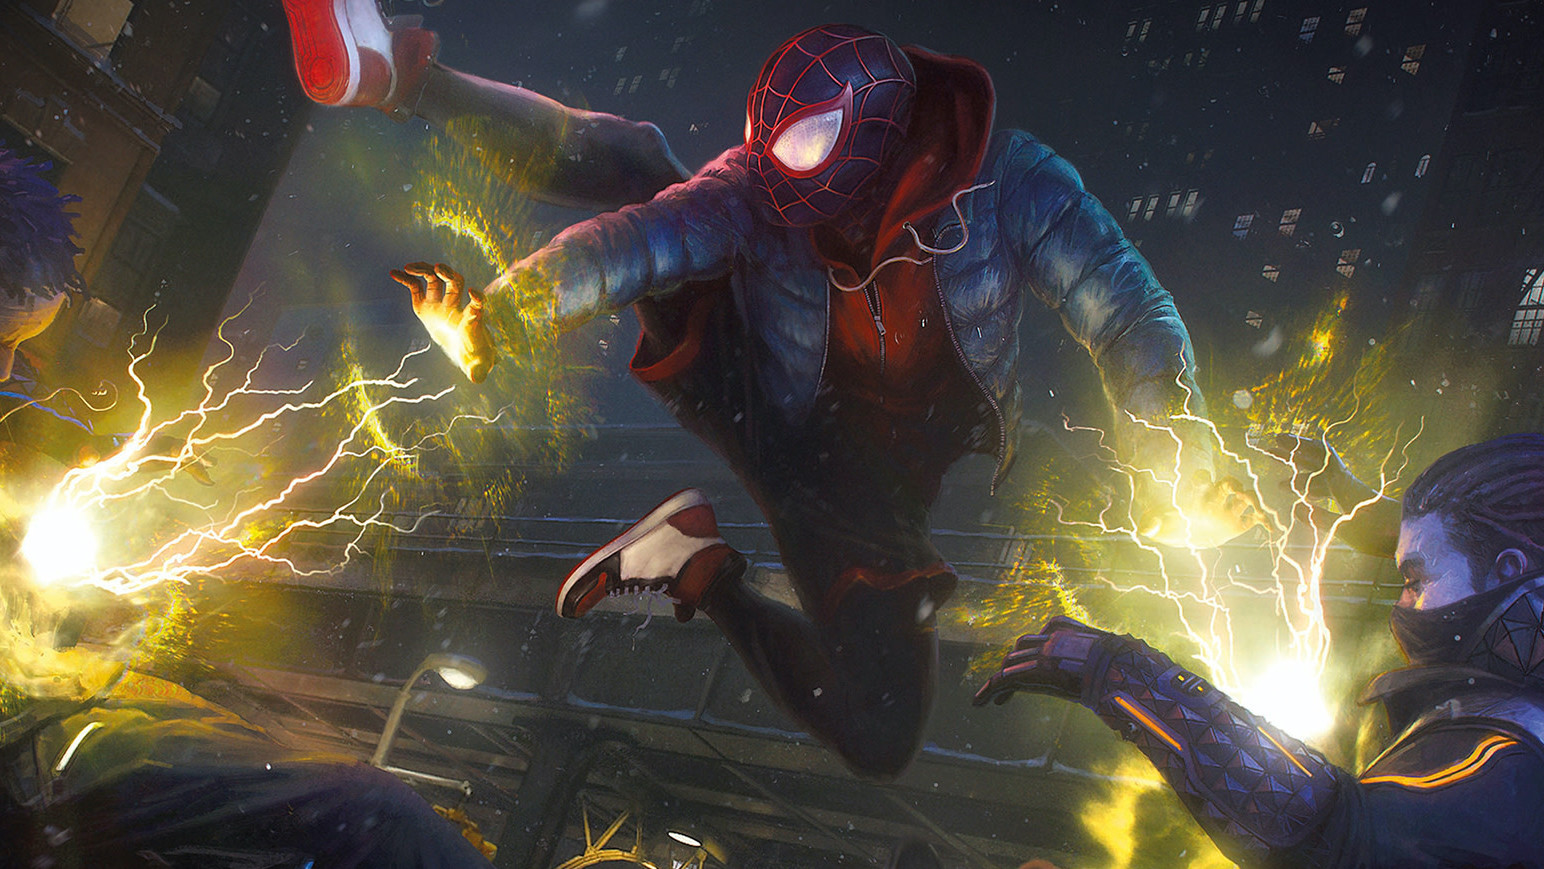 Miles Morales zapping two of his enemies on the cover of Marvel's Spider-Man: Miles Morales - The Art of the Game. (Screenshot: Titan Books)